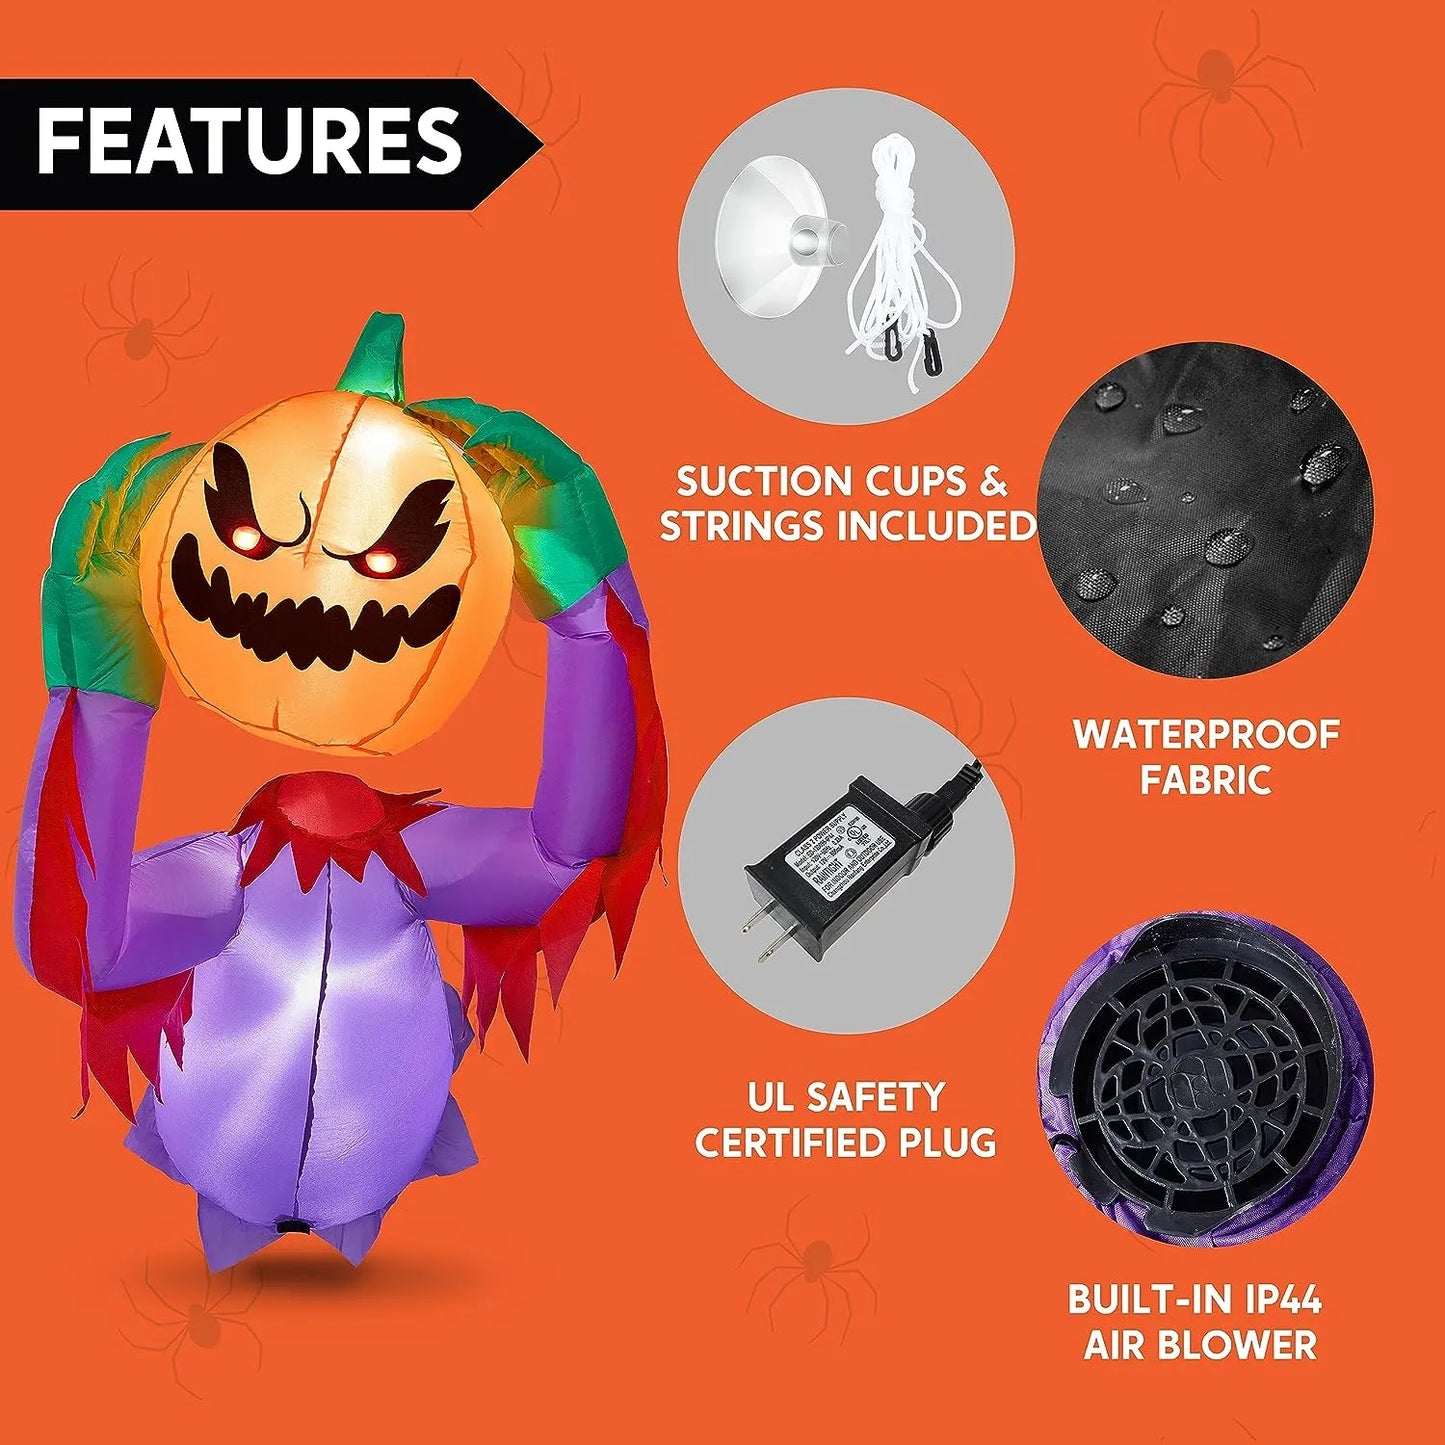 Joiedomi 4.5 FT Tall Halloween Inflatable Pumpkin Ghost Broke Out